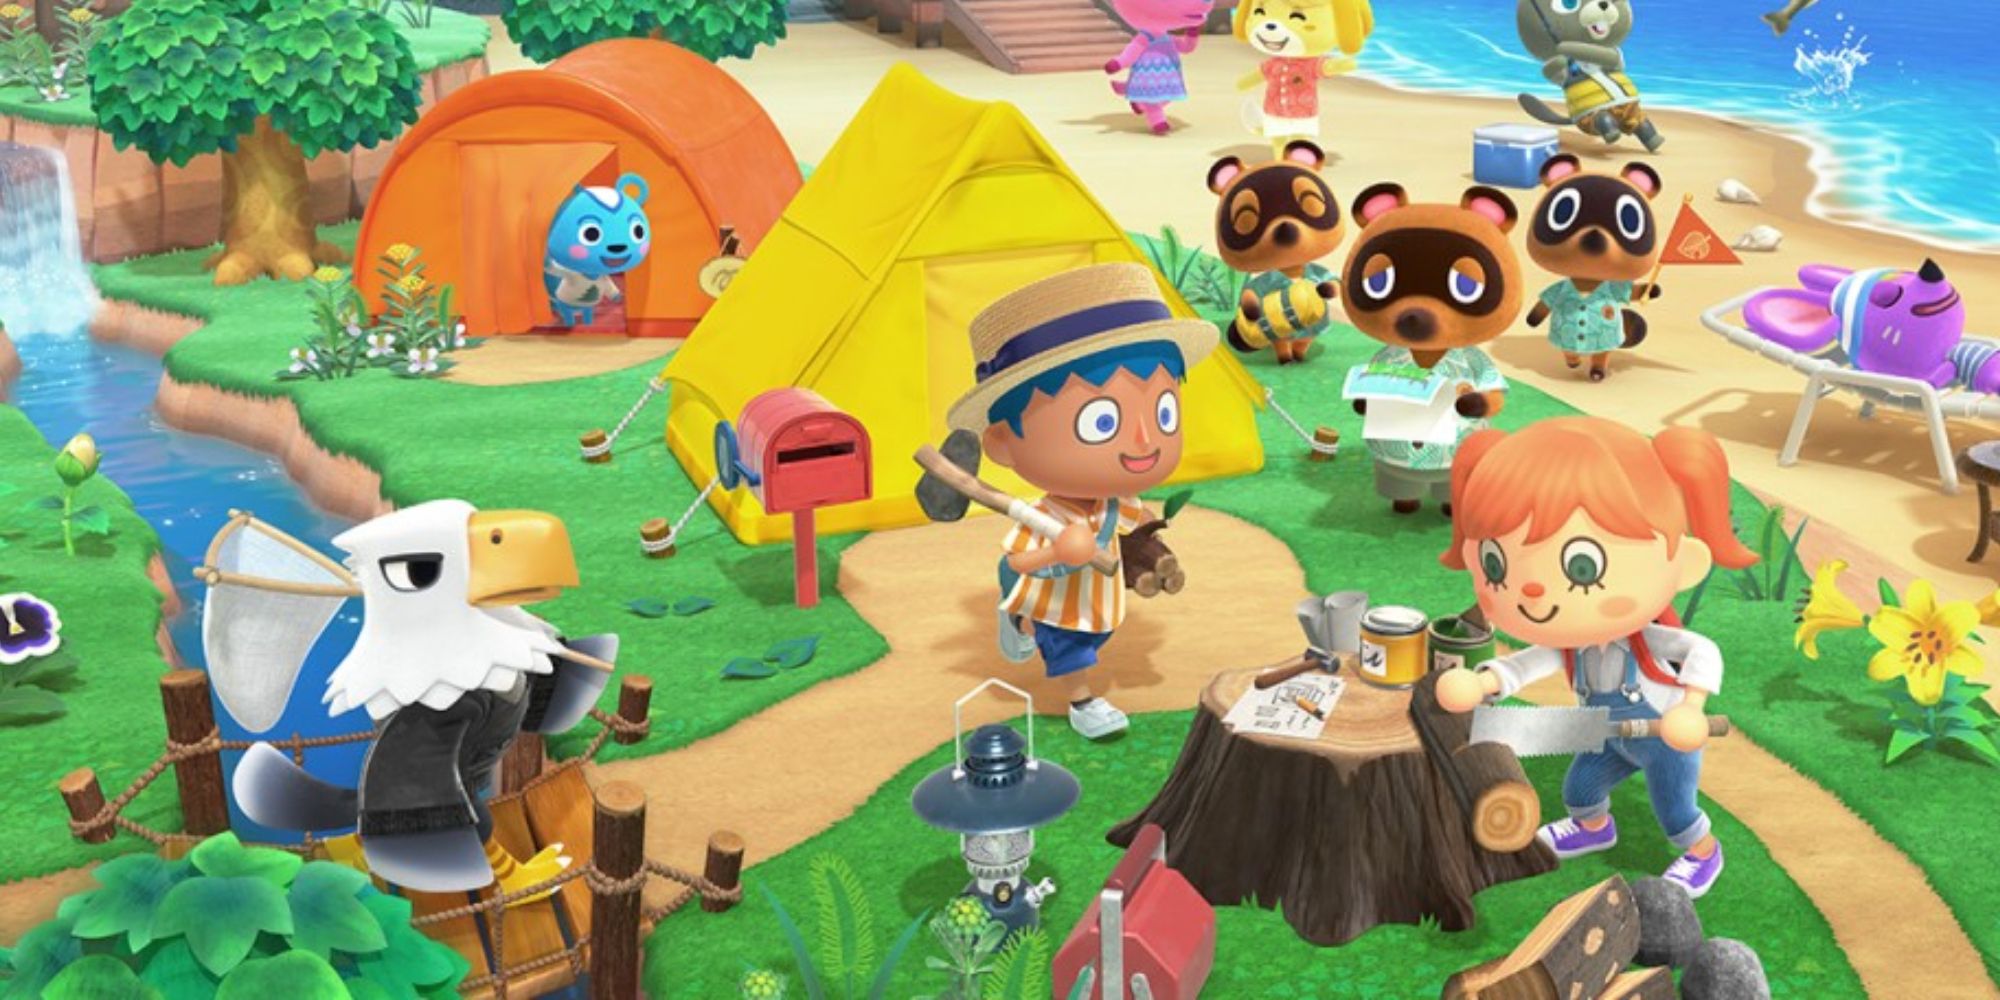 A group of villagers in Animal Crossing: New Horizons